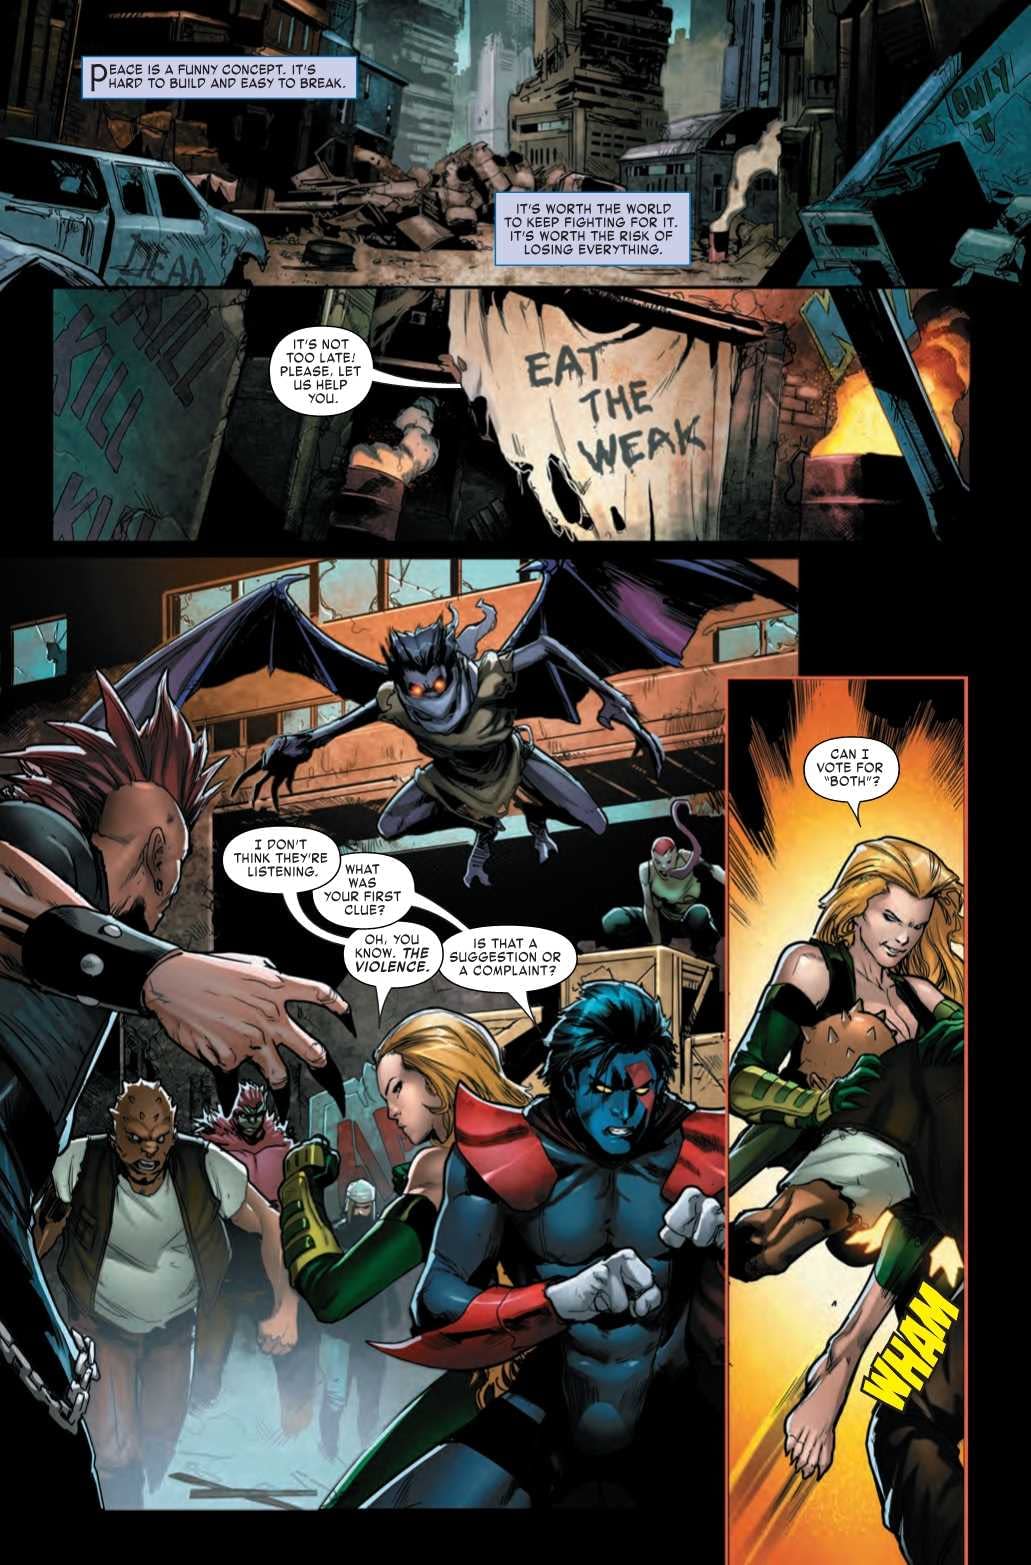 Is Everyone an Anti-Vaxxer in the Age X-Man? Next Week's Amazing Nightcrawler #1 (Preview)